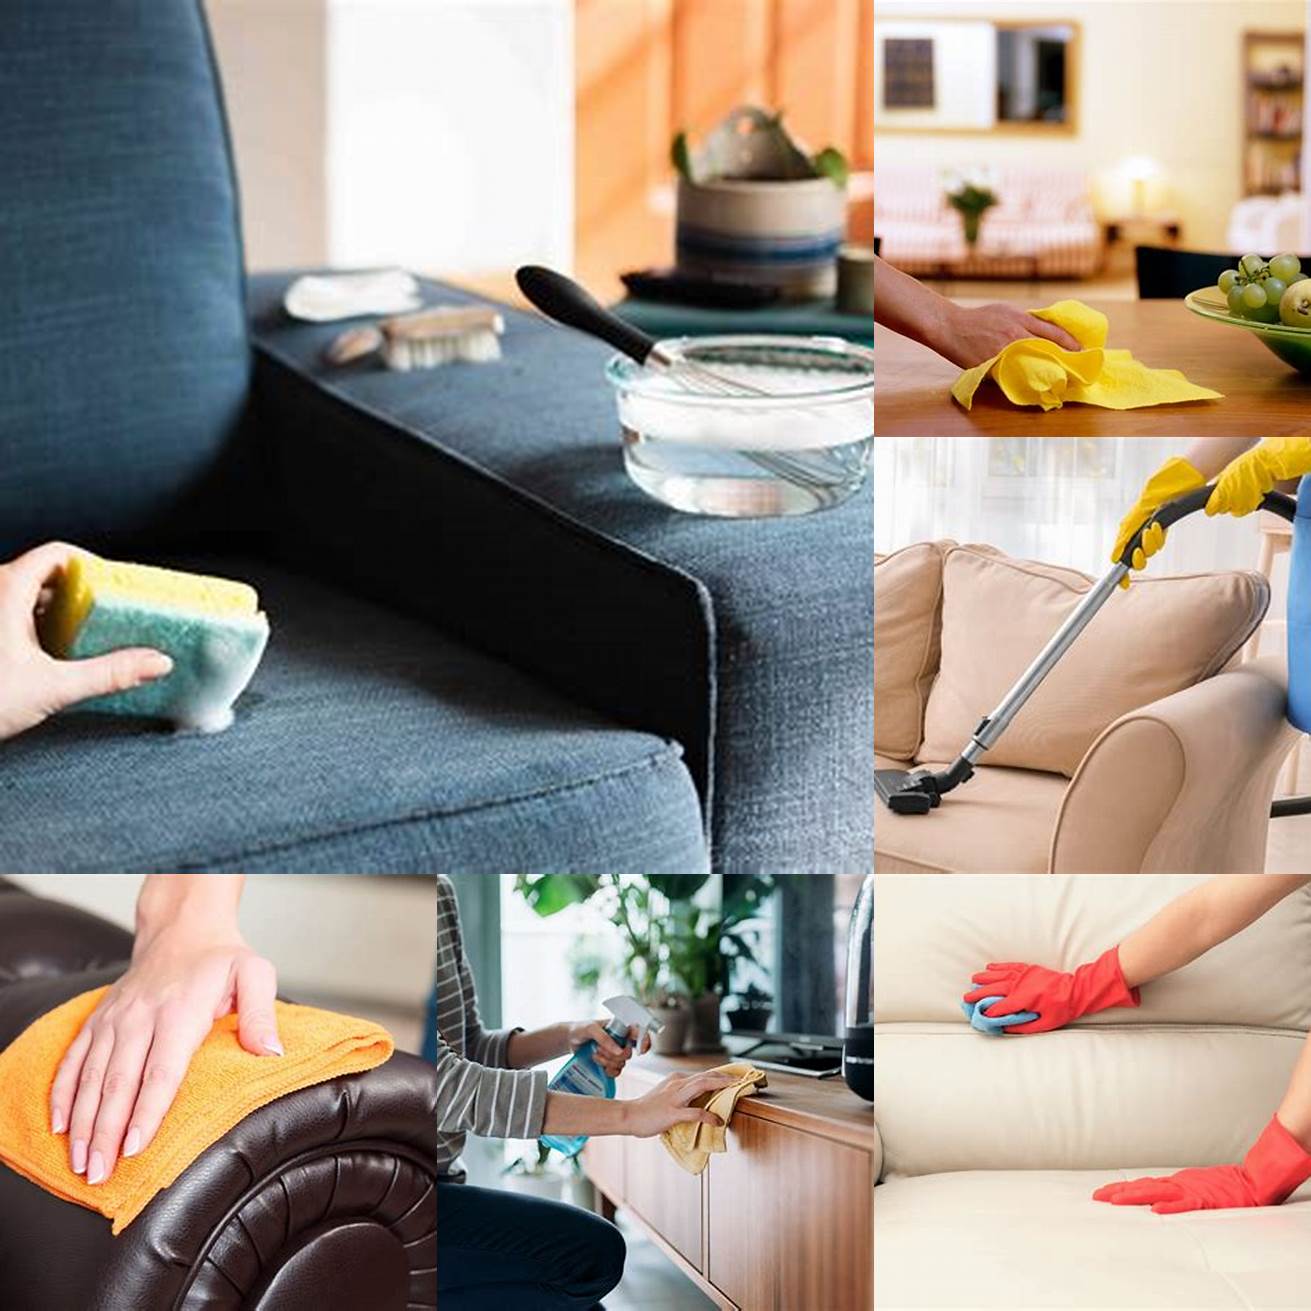 Clean the Furniture Regularly